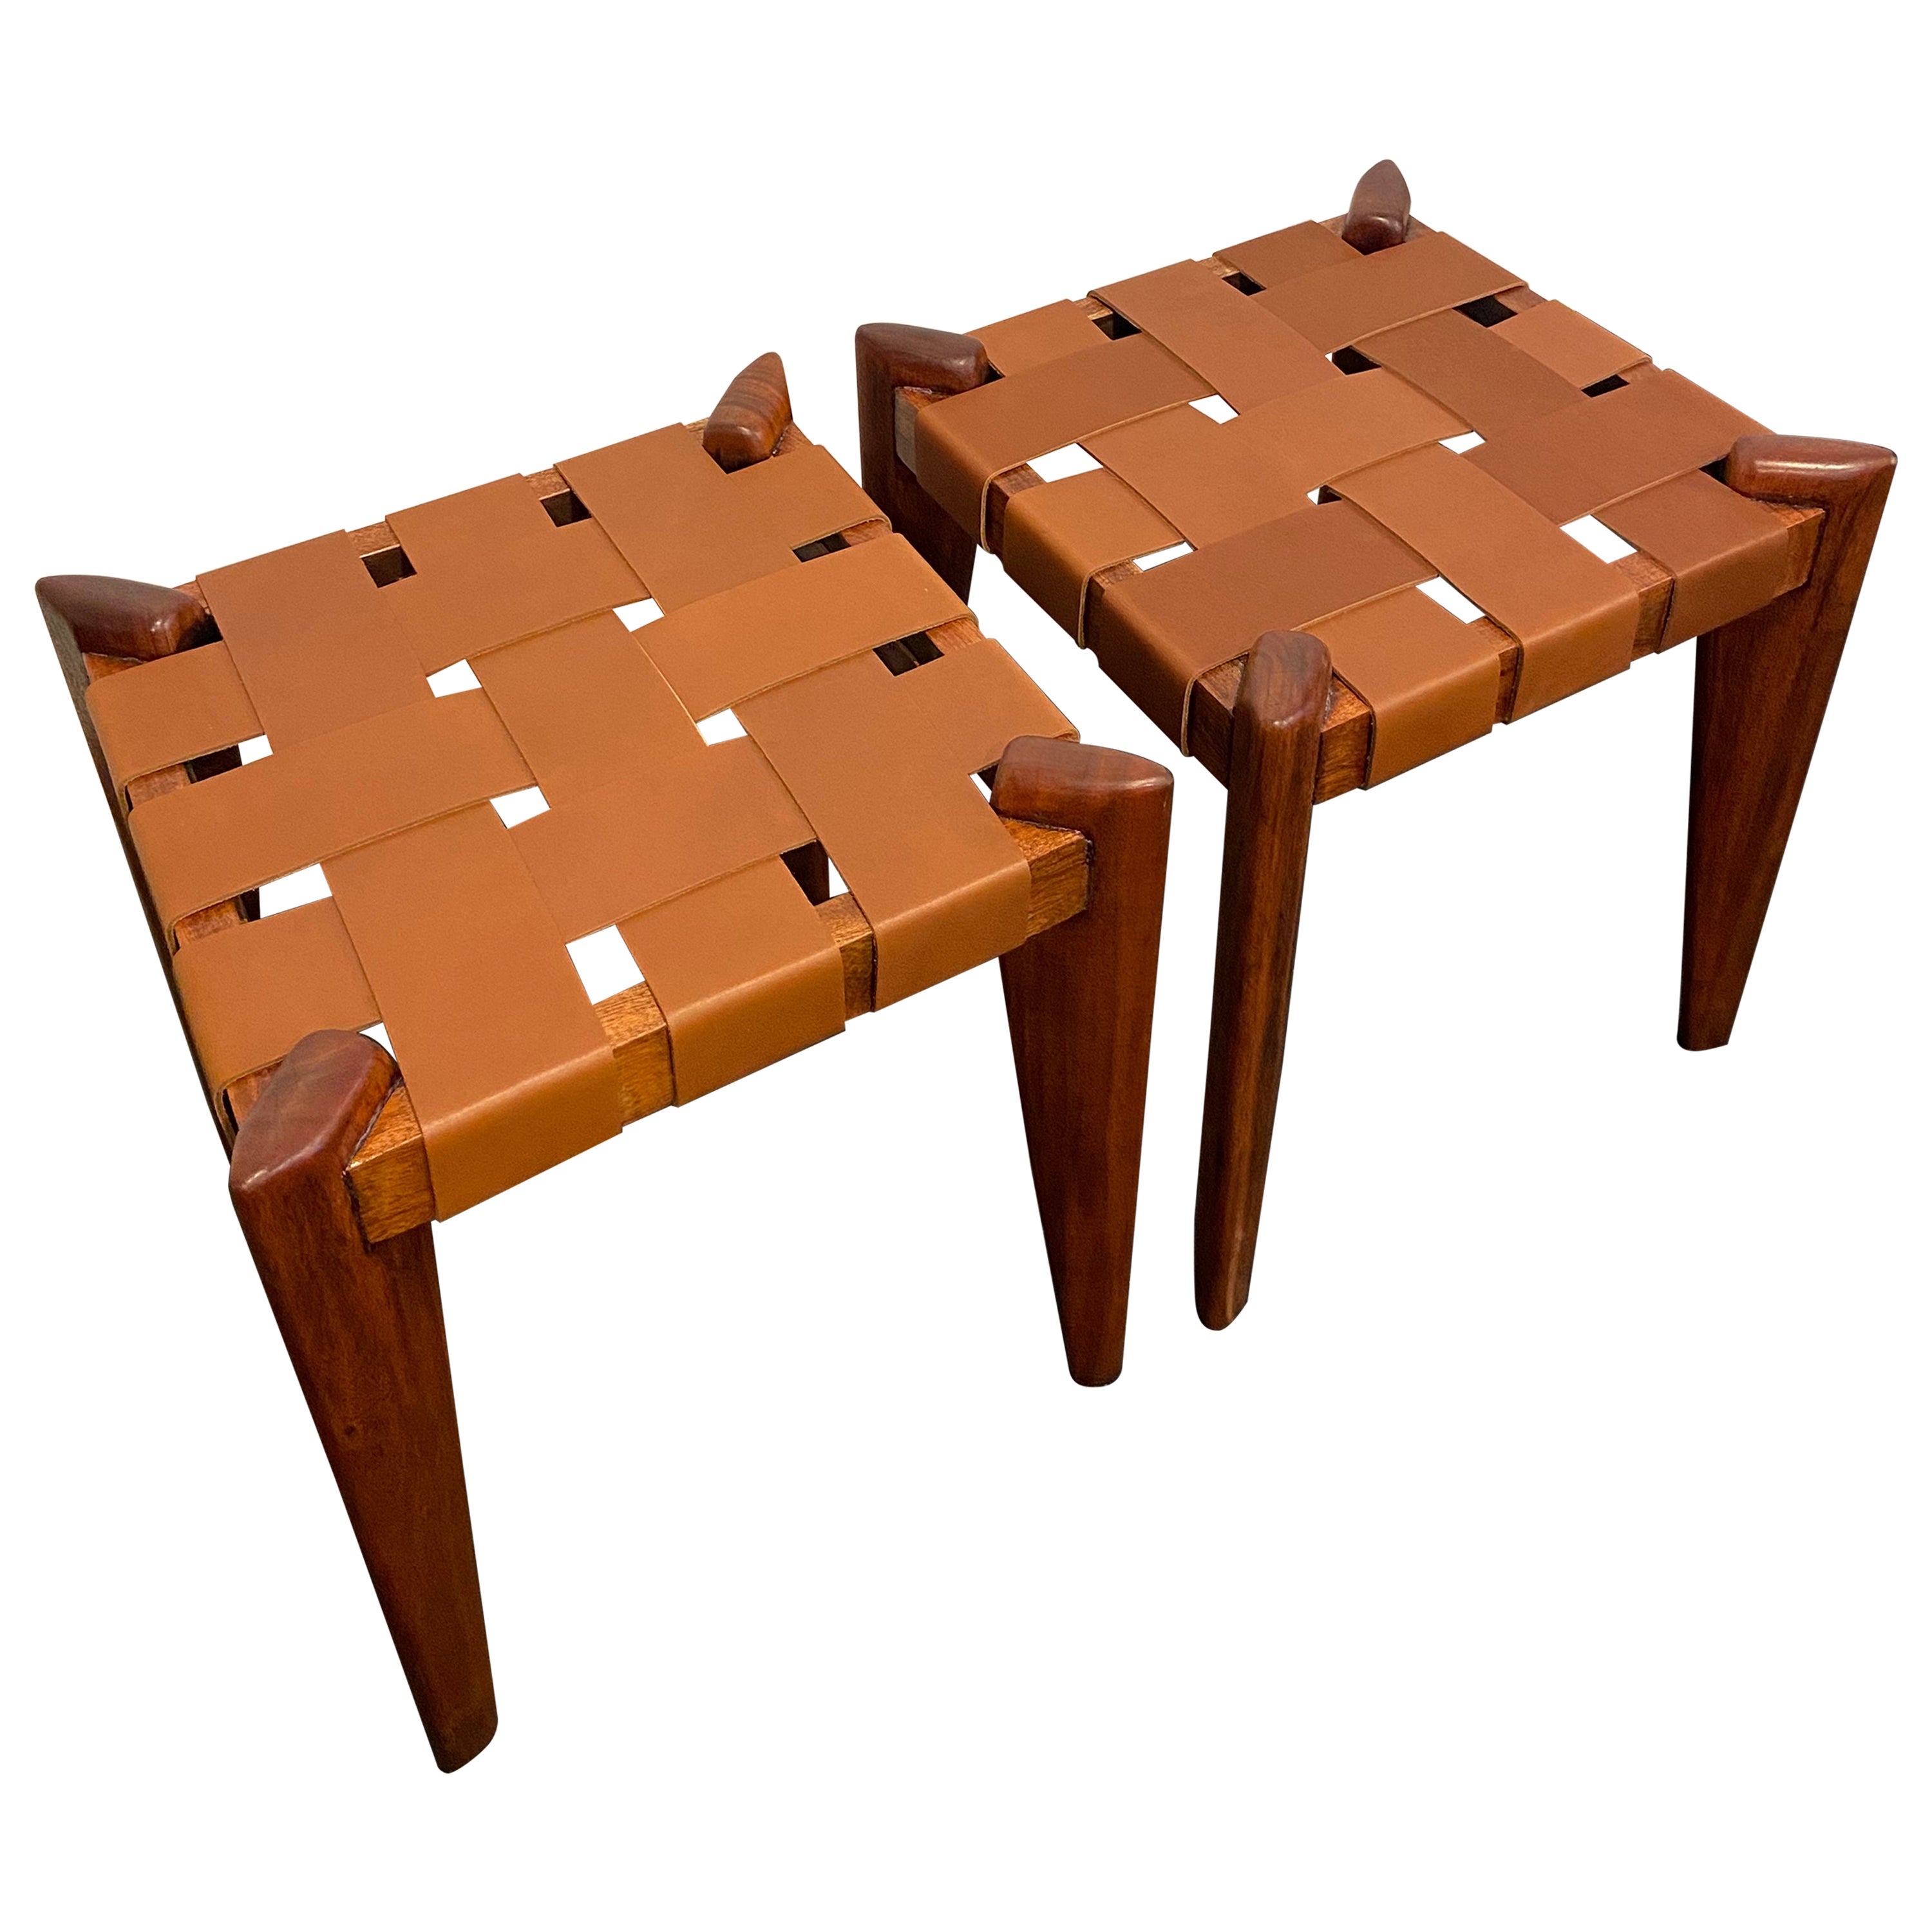 Edmond Spence Woven Leather Stools-a Pair For Sale